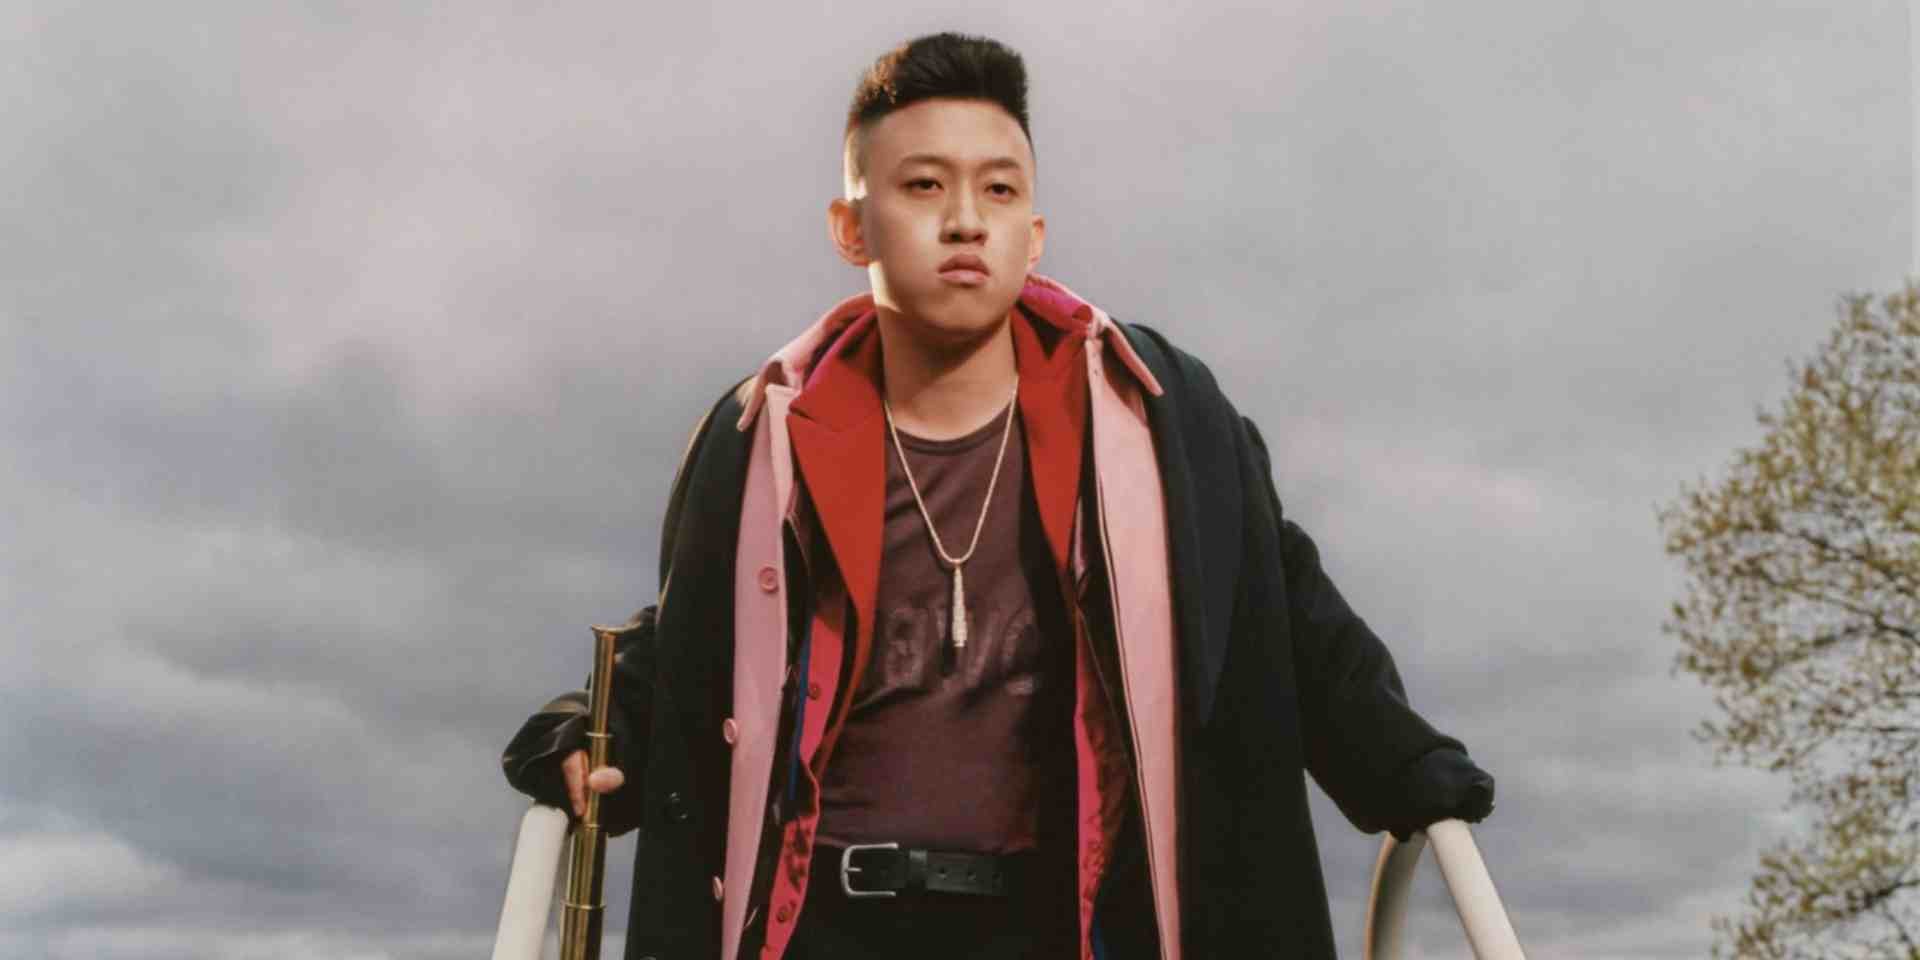 Rich Brian releases sophomore album The Sailor, featuring RZA and Joji